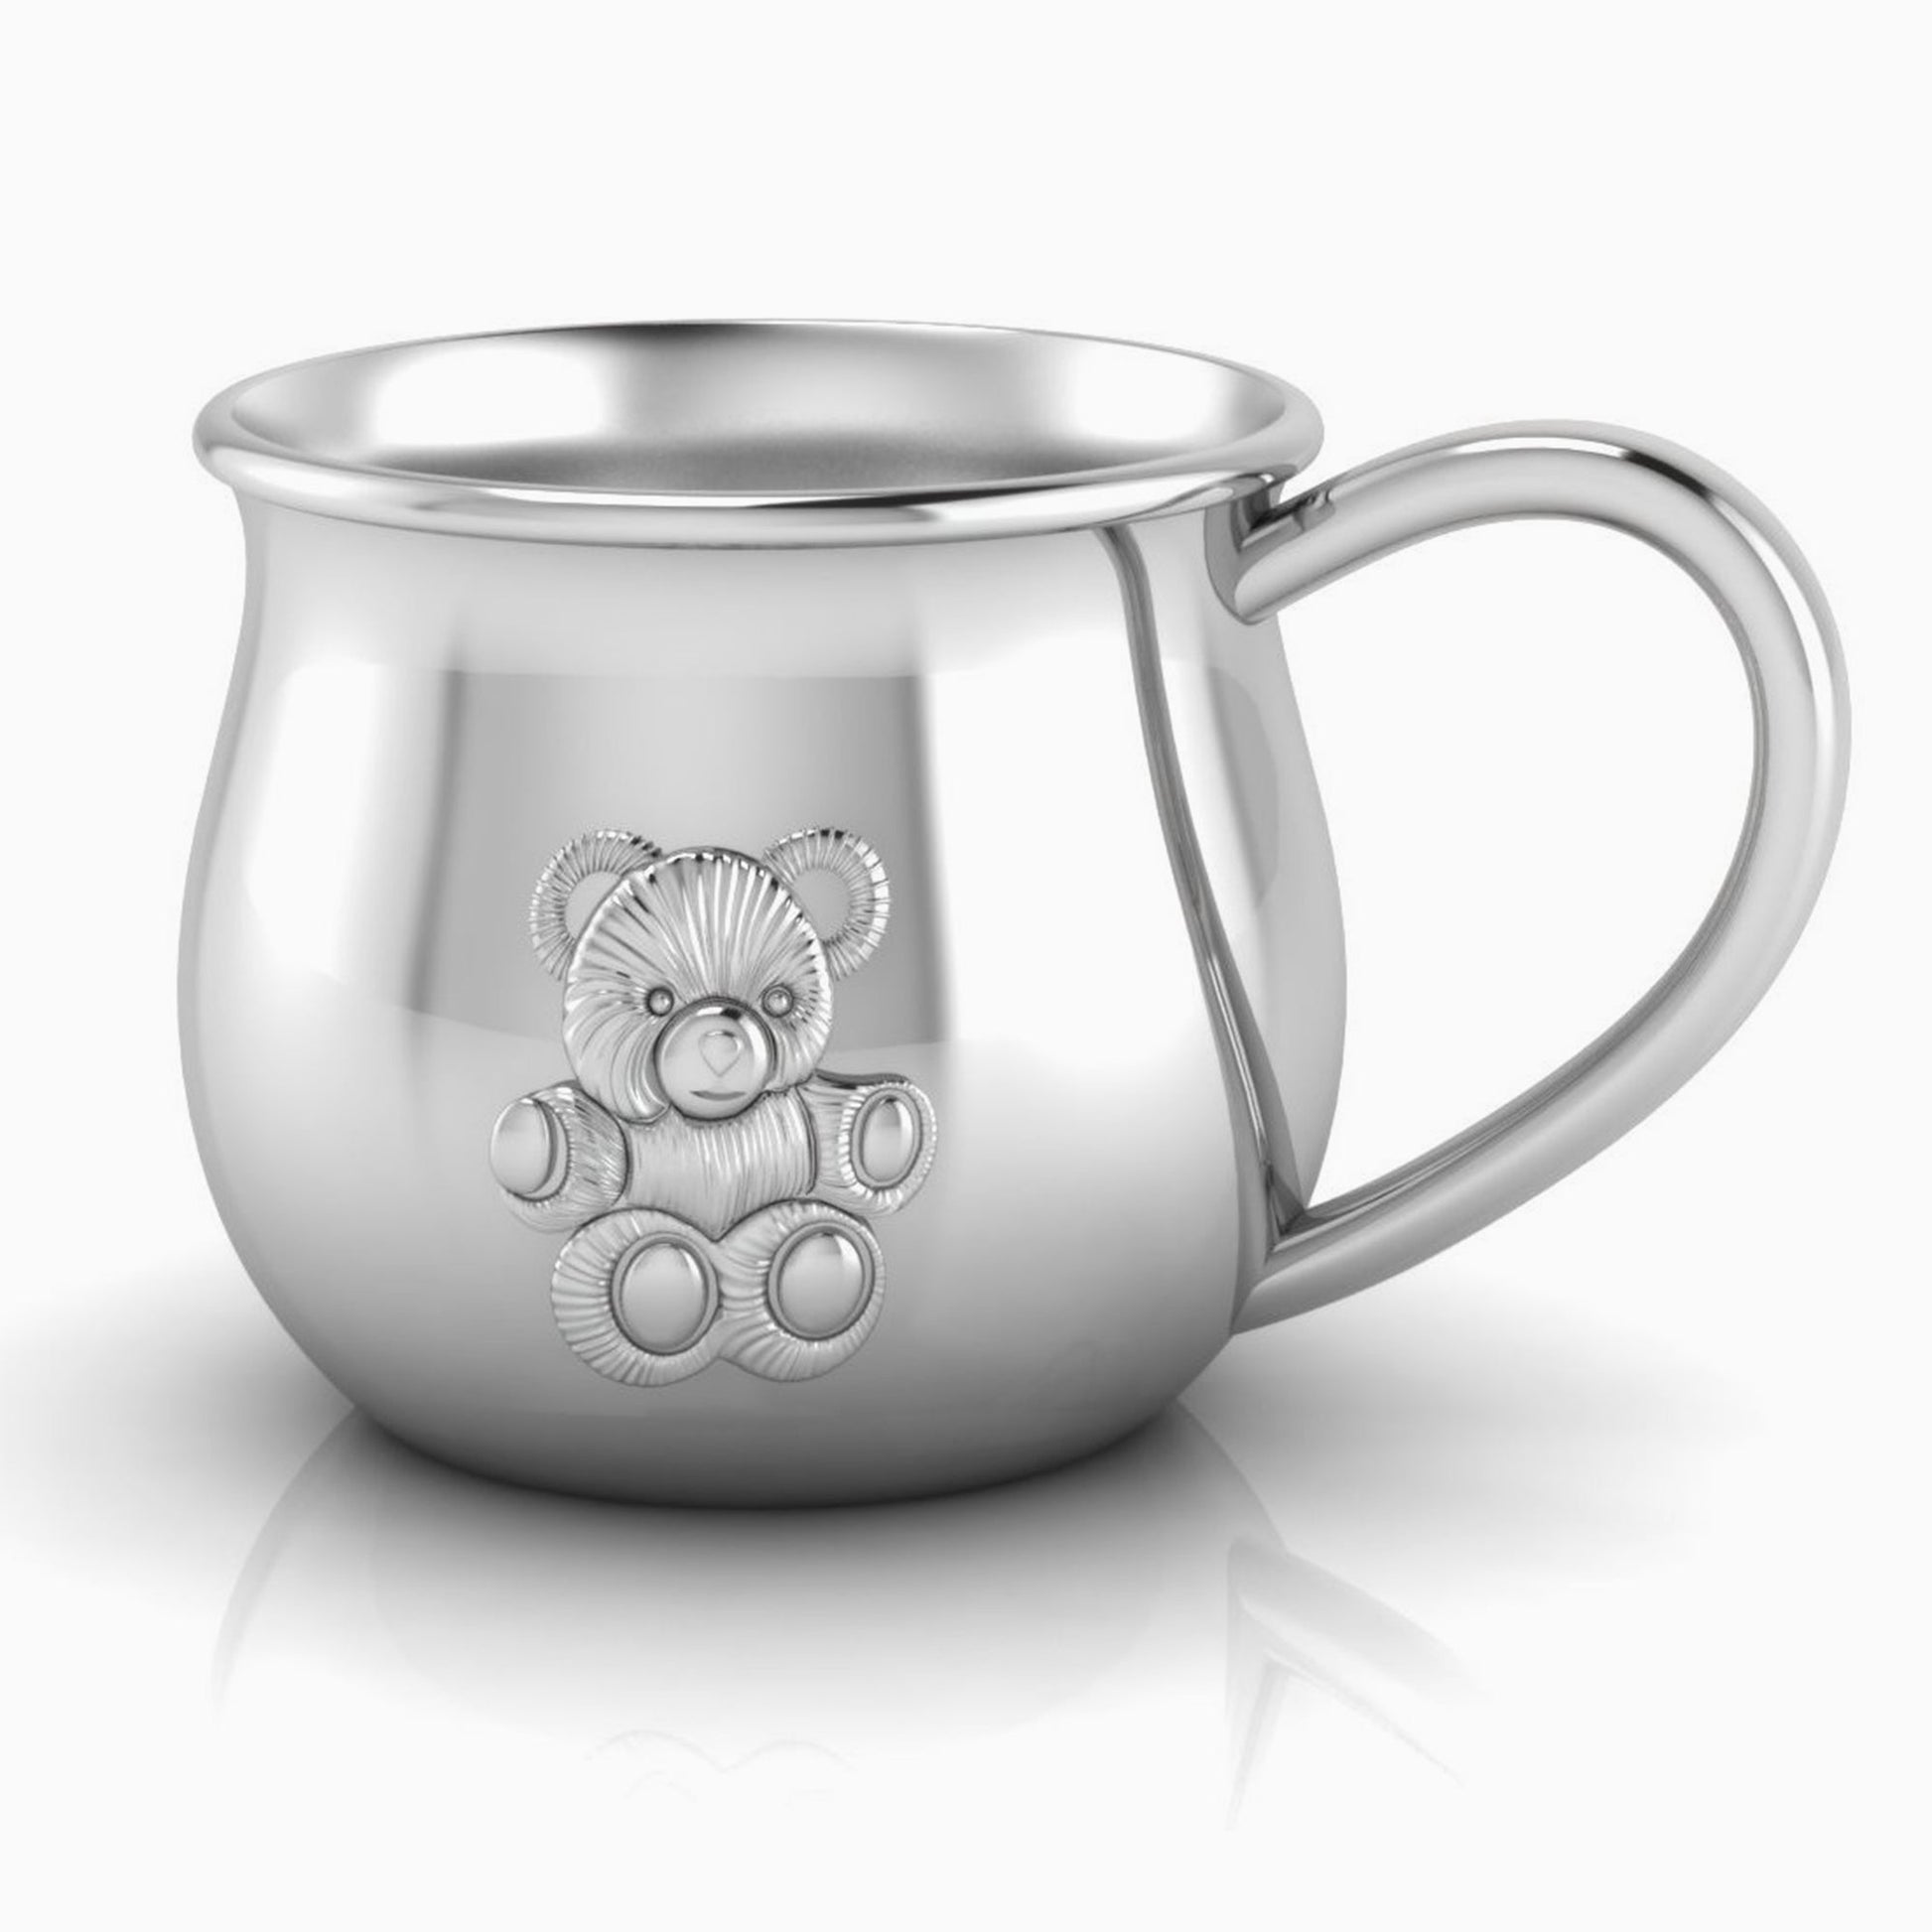 Silver Plated Bear Baby Cup